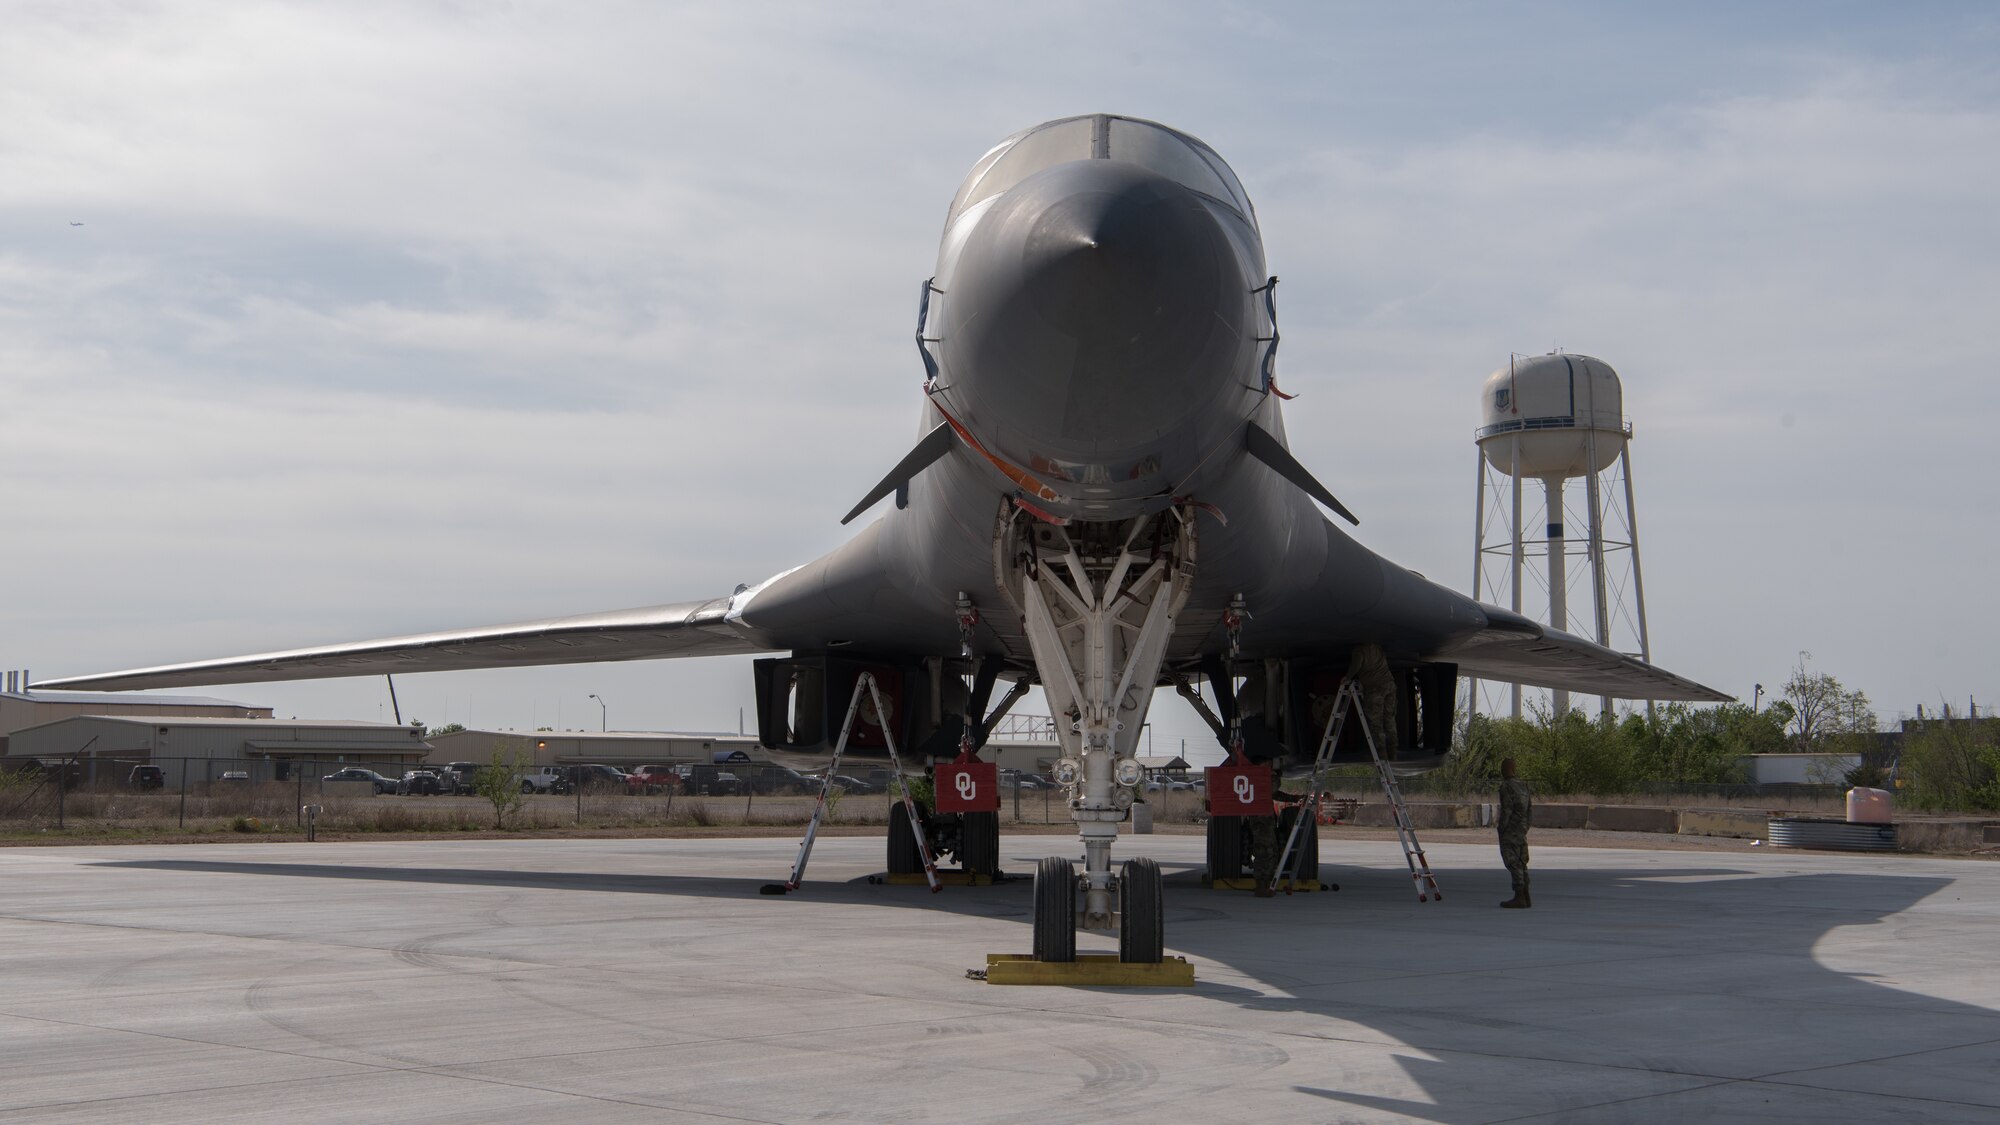 B-1B aircraft with right wing extended.